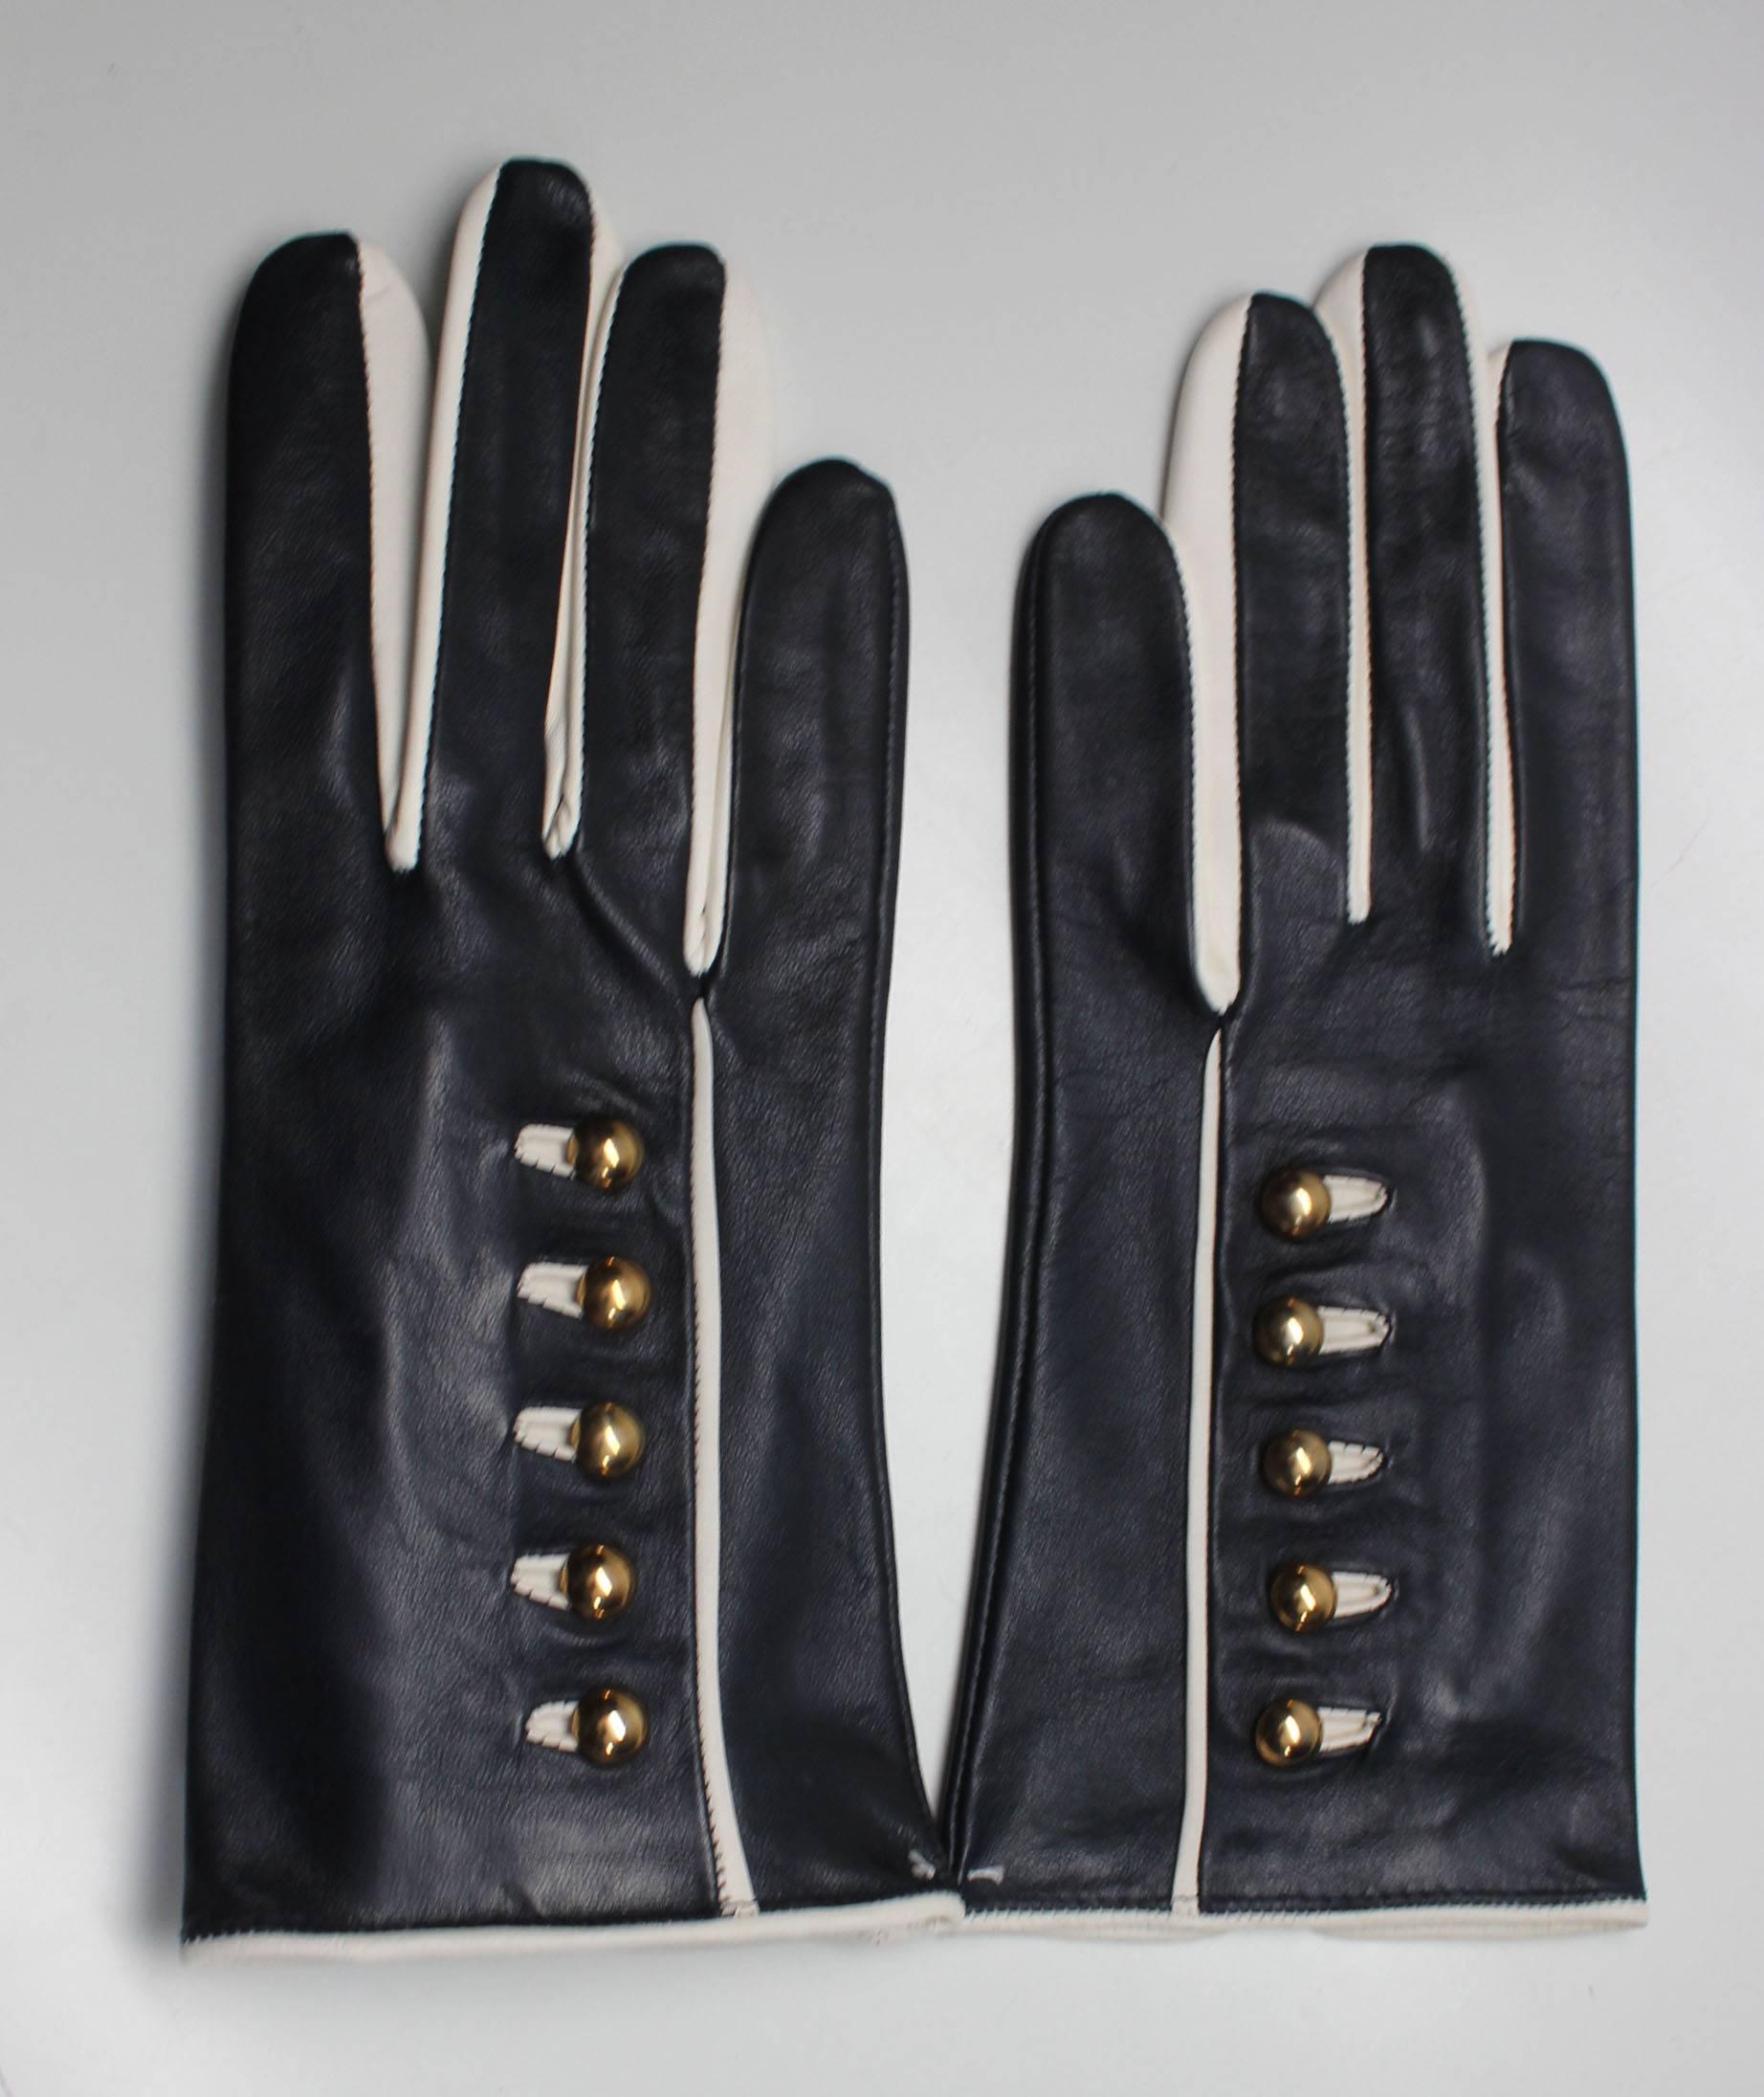 These Escada gloves are chic and the perfect winter accessory. Designed by Margaretha Ley, the navy gloves have white piping and 5 gold button details. Made in Germany, size 7. Never worn, original tags attached. 